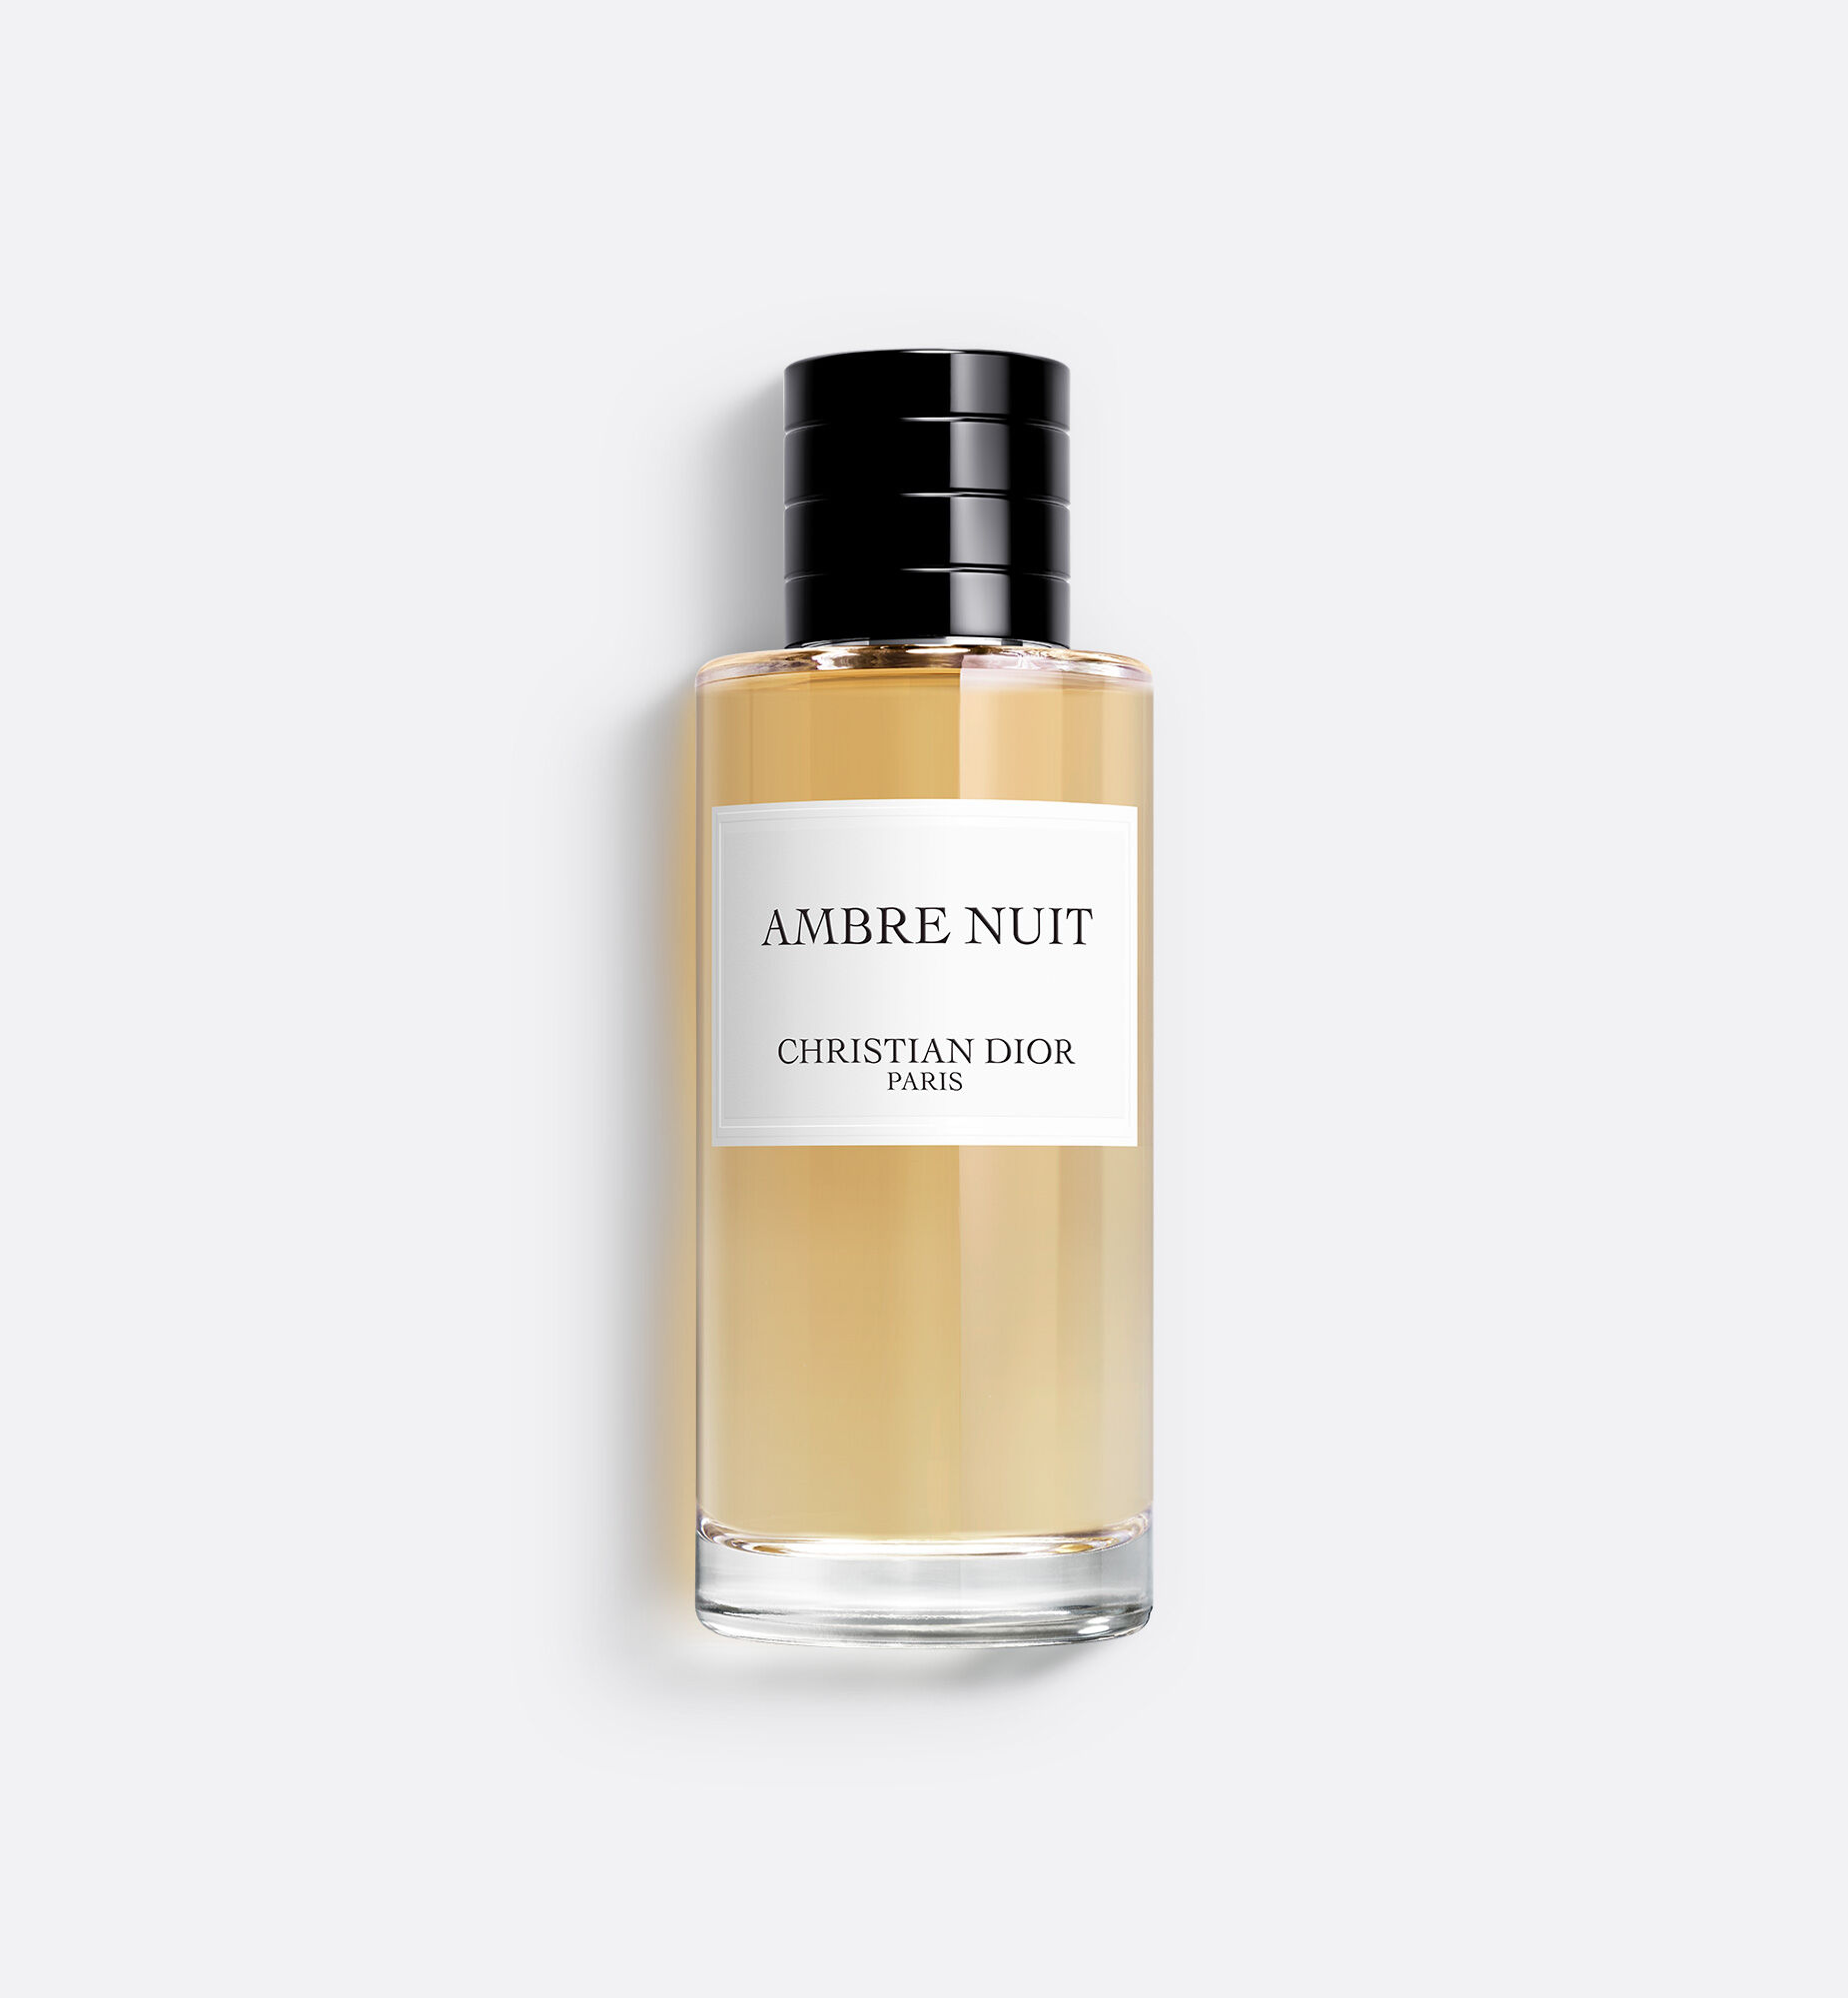 Ambre Nuit fragrance: the unisex & mysterious oriental fragrance